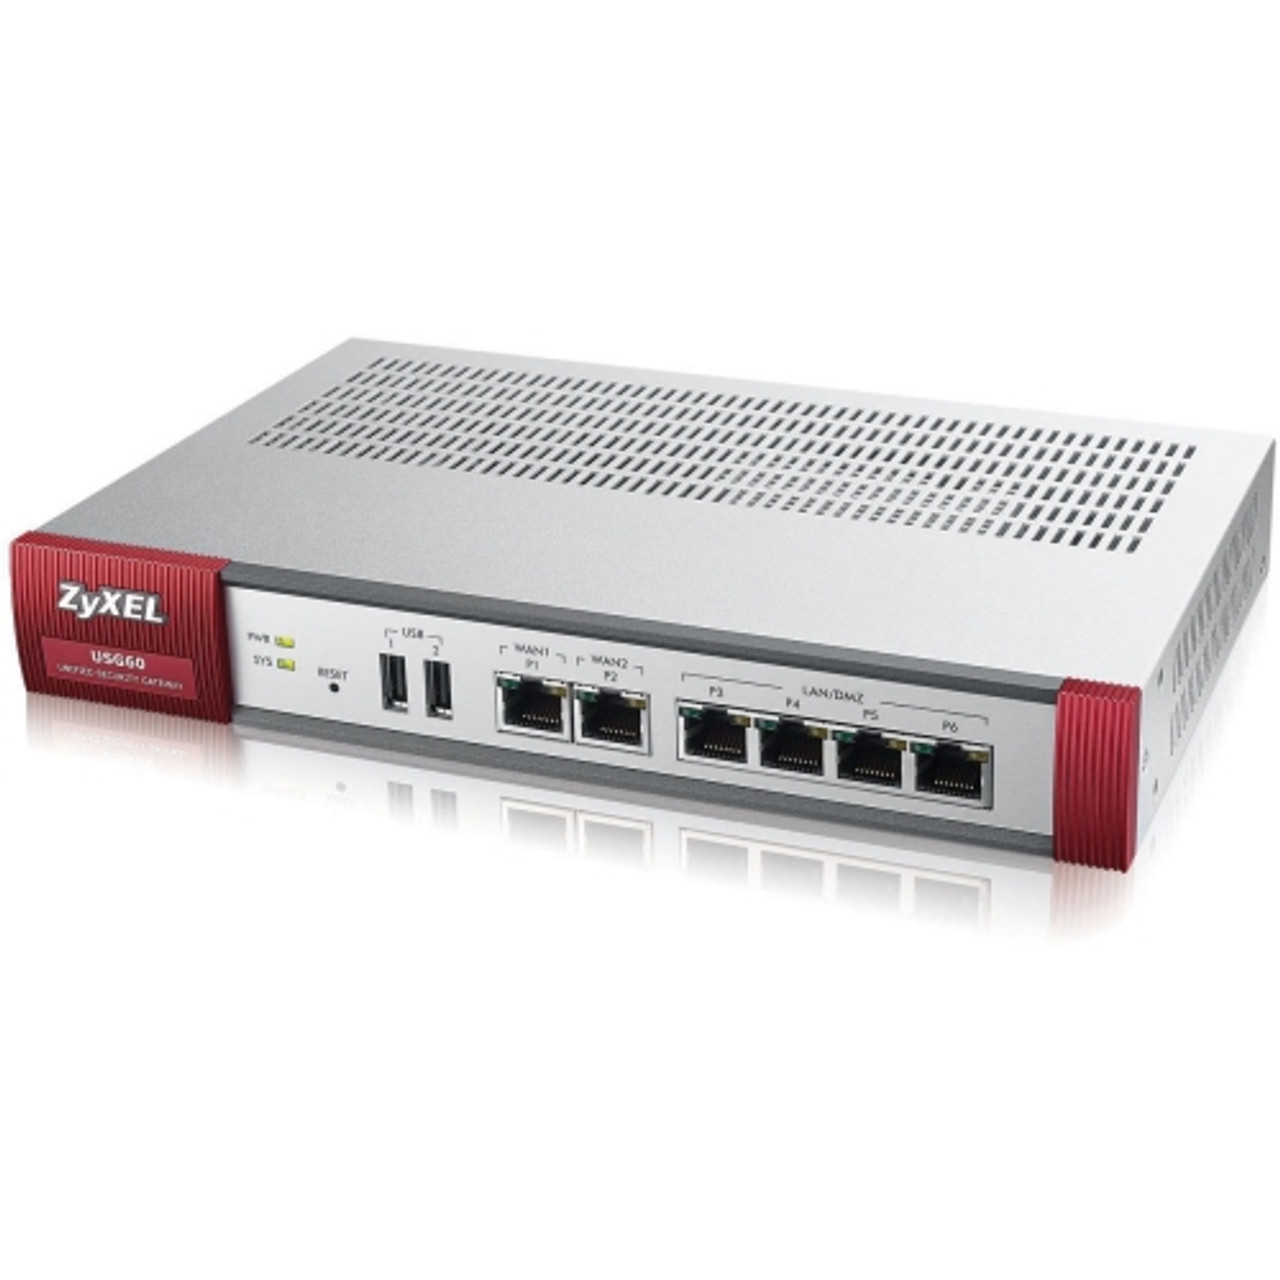 USG60-NB Zyxel Next Generation Unified Security Gateway with 20 Vpn Tun